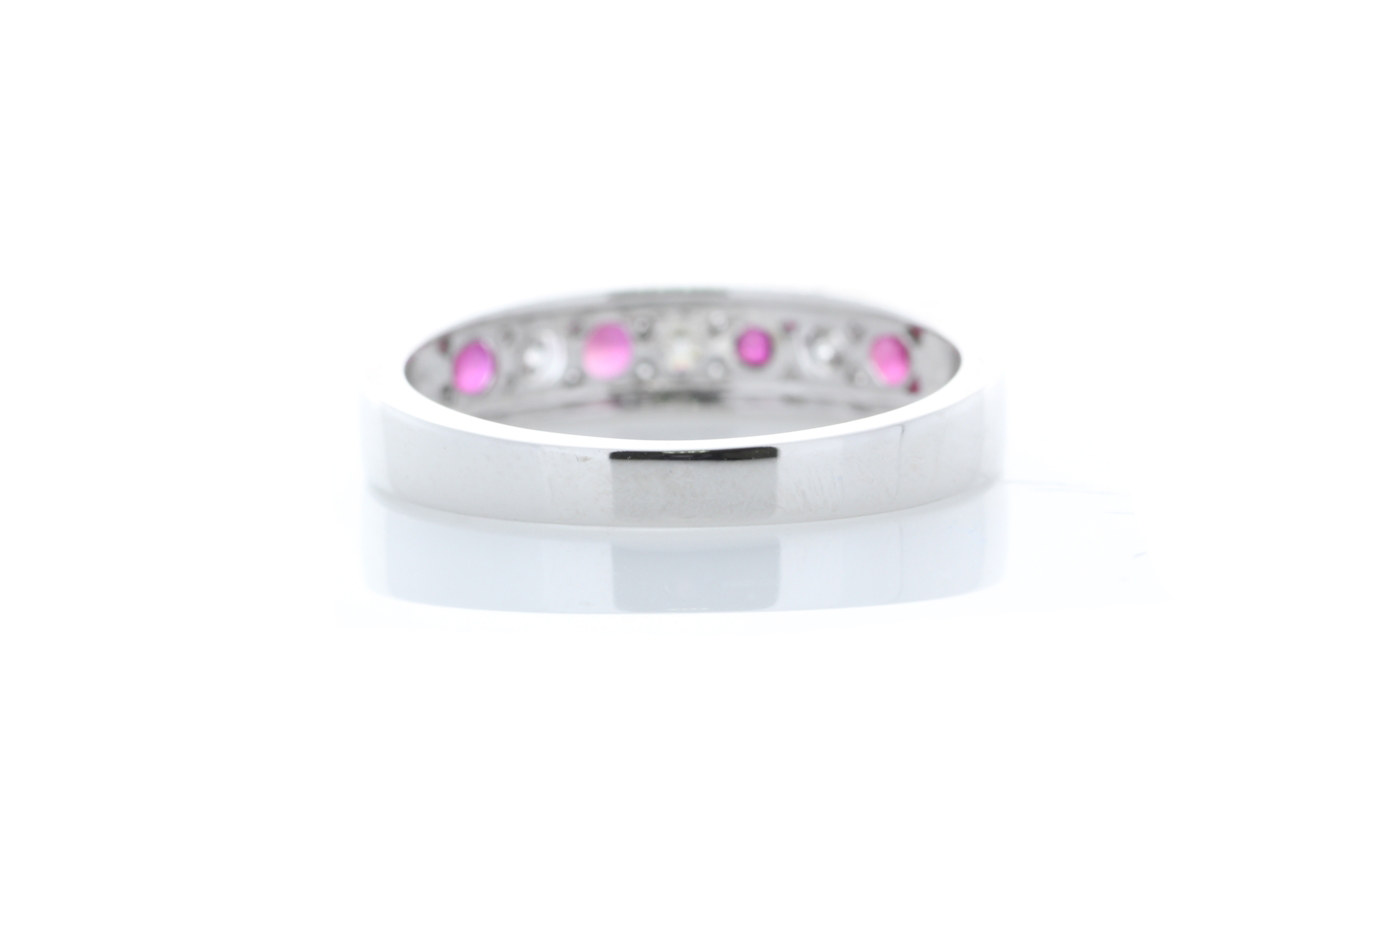 9ct White Gold Channel Set Semi Eternity Diamond And Ruby Ring 0.25 Carats - Image 3 of 5